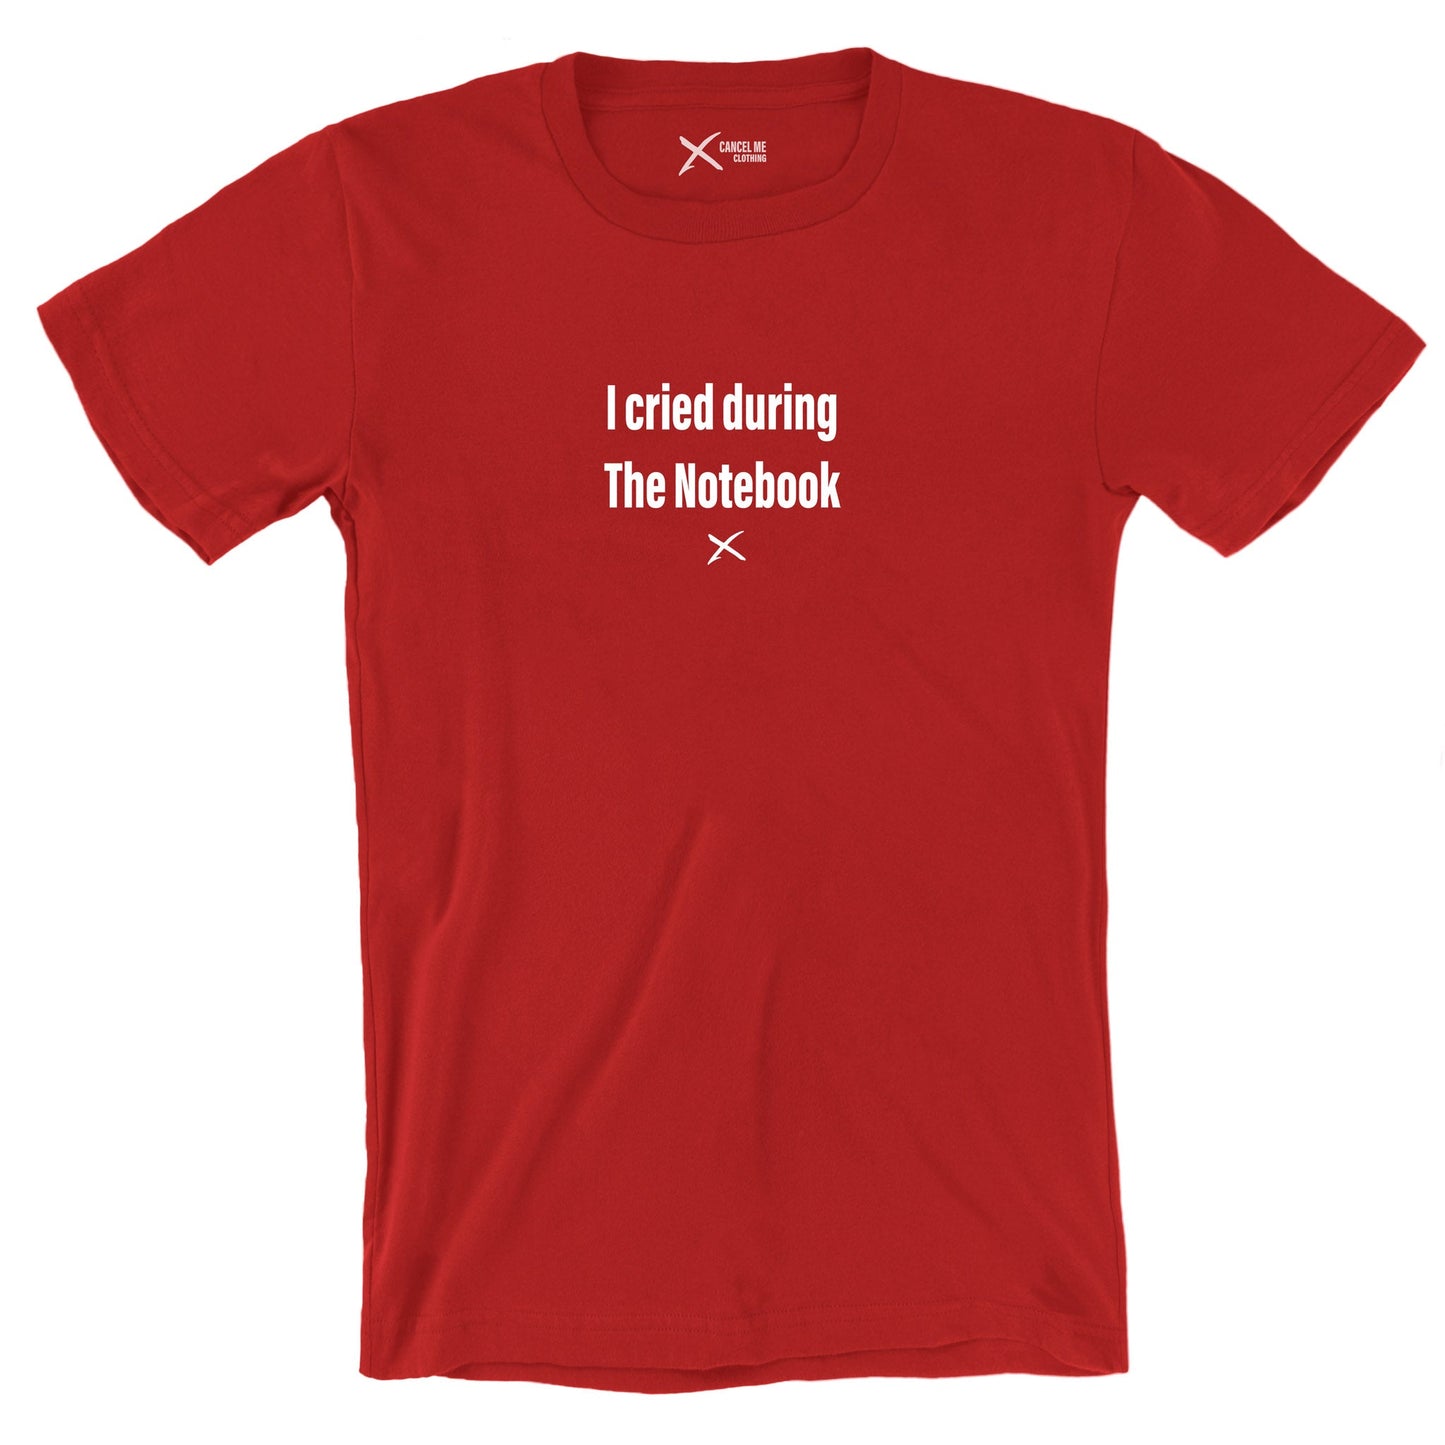 I cried during The Notebook - Shirt